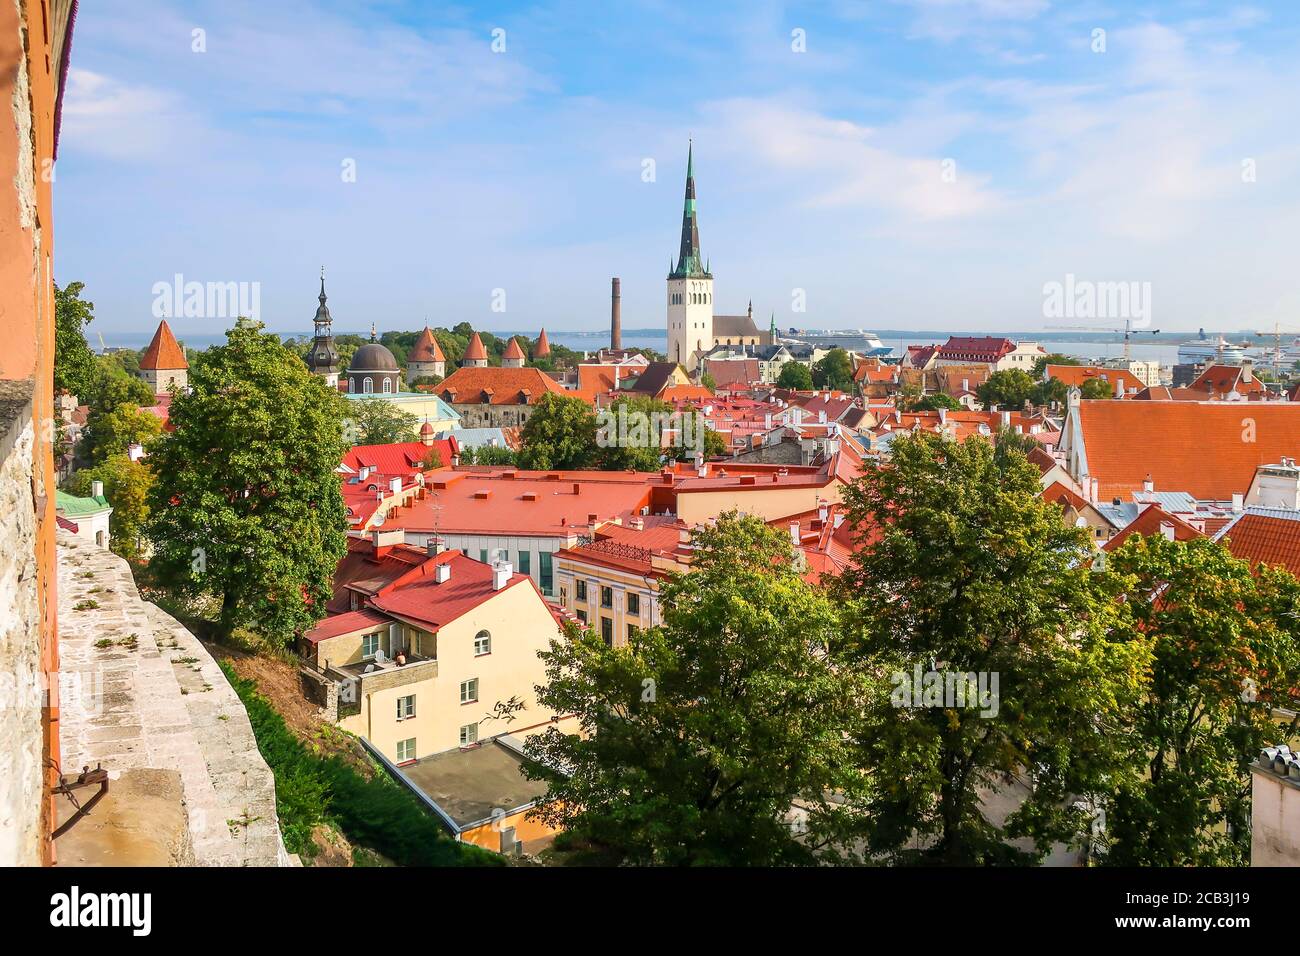 Afternoon view overlooking the medieval walled city of Tallinn Estonia on a summer day in the Baltic region of Northern Europe. Stock Photo